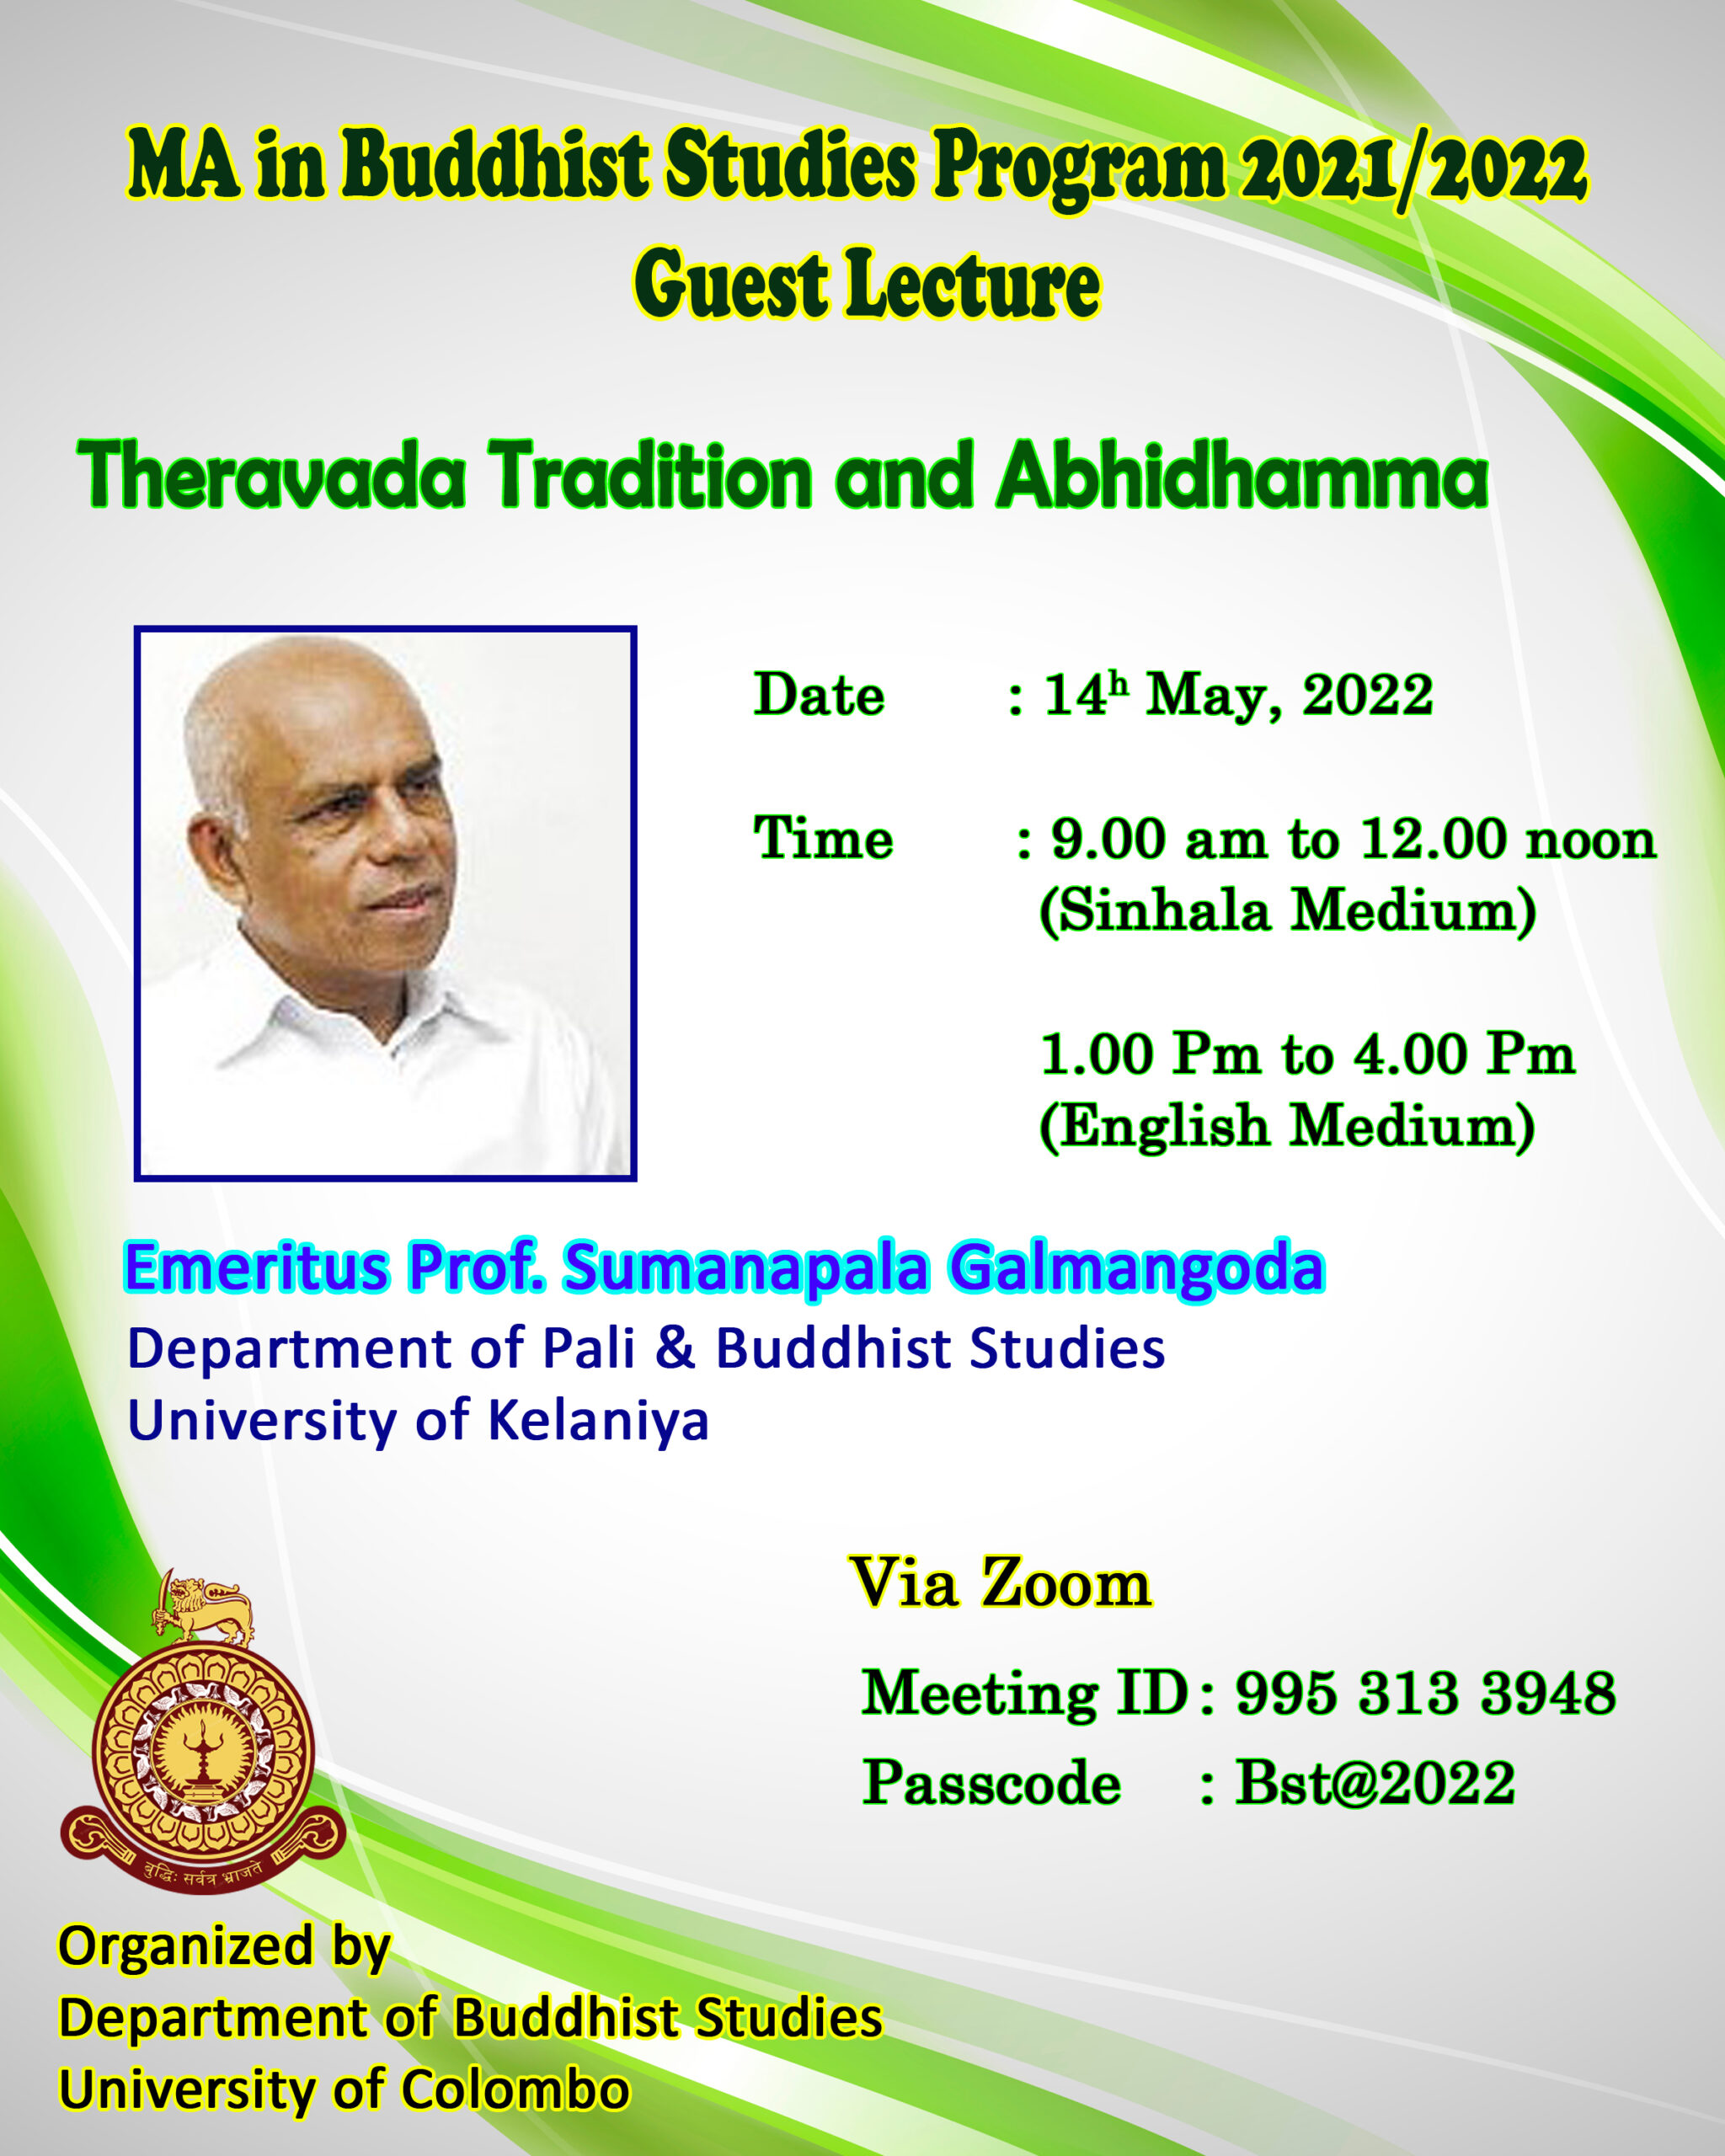 Guest Lecture on ‘Theravada tradition and Abhidhamma’ – 14th May